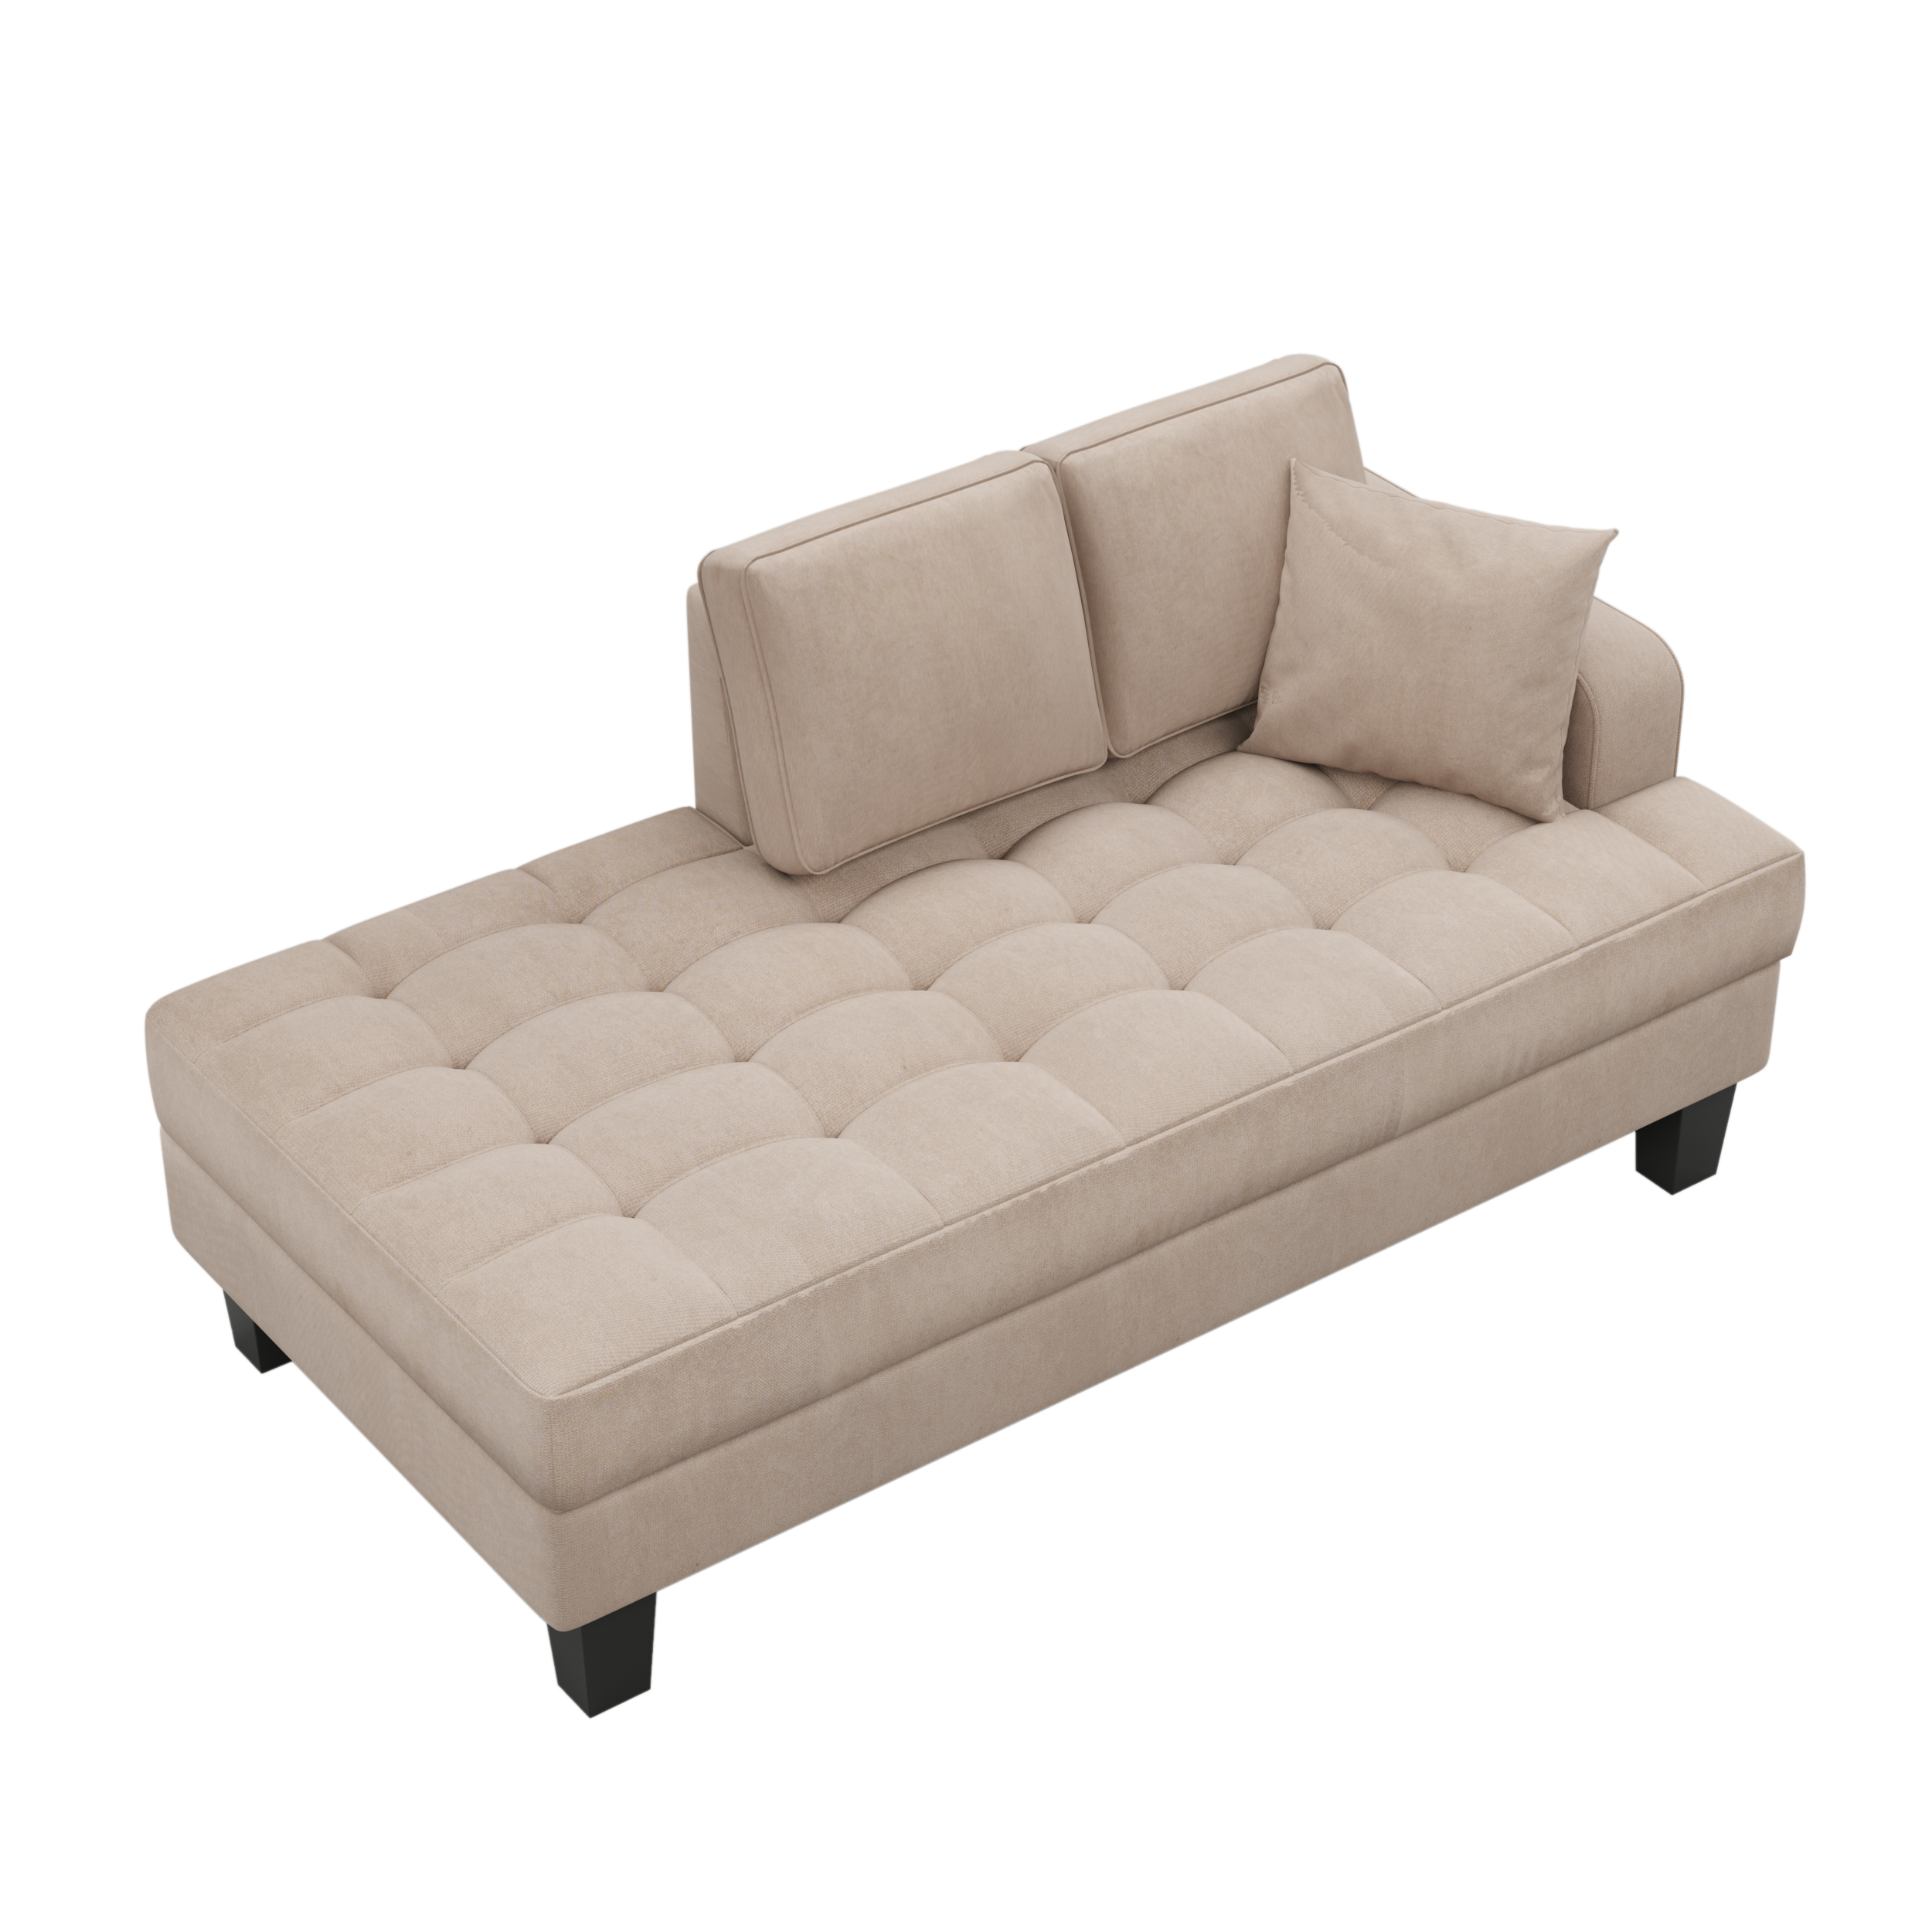 64" Fabric Chaise Lounge,Toss Pillow included - WF282806AAE